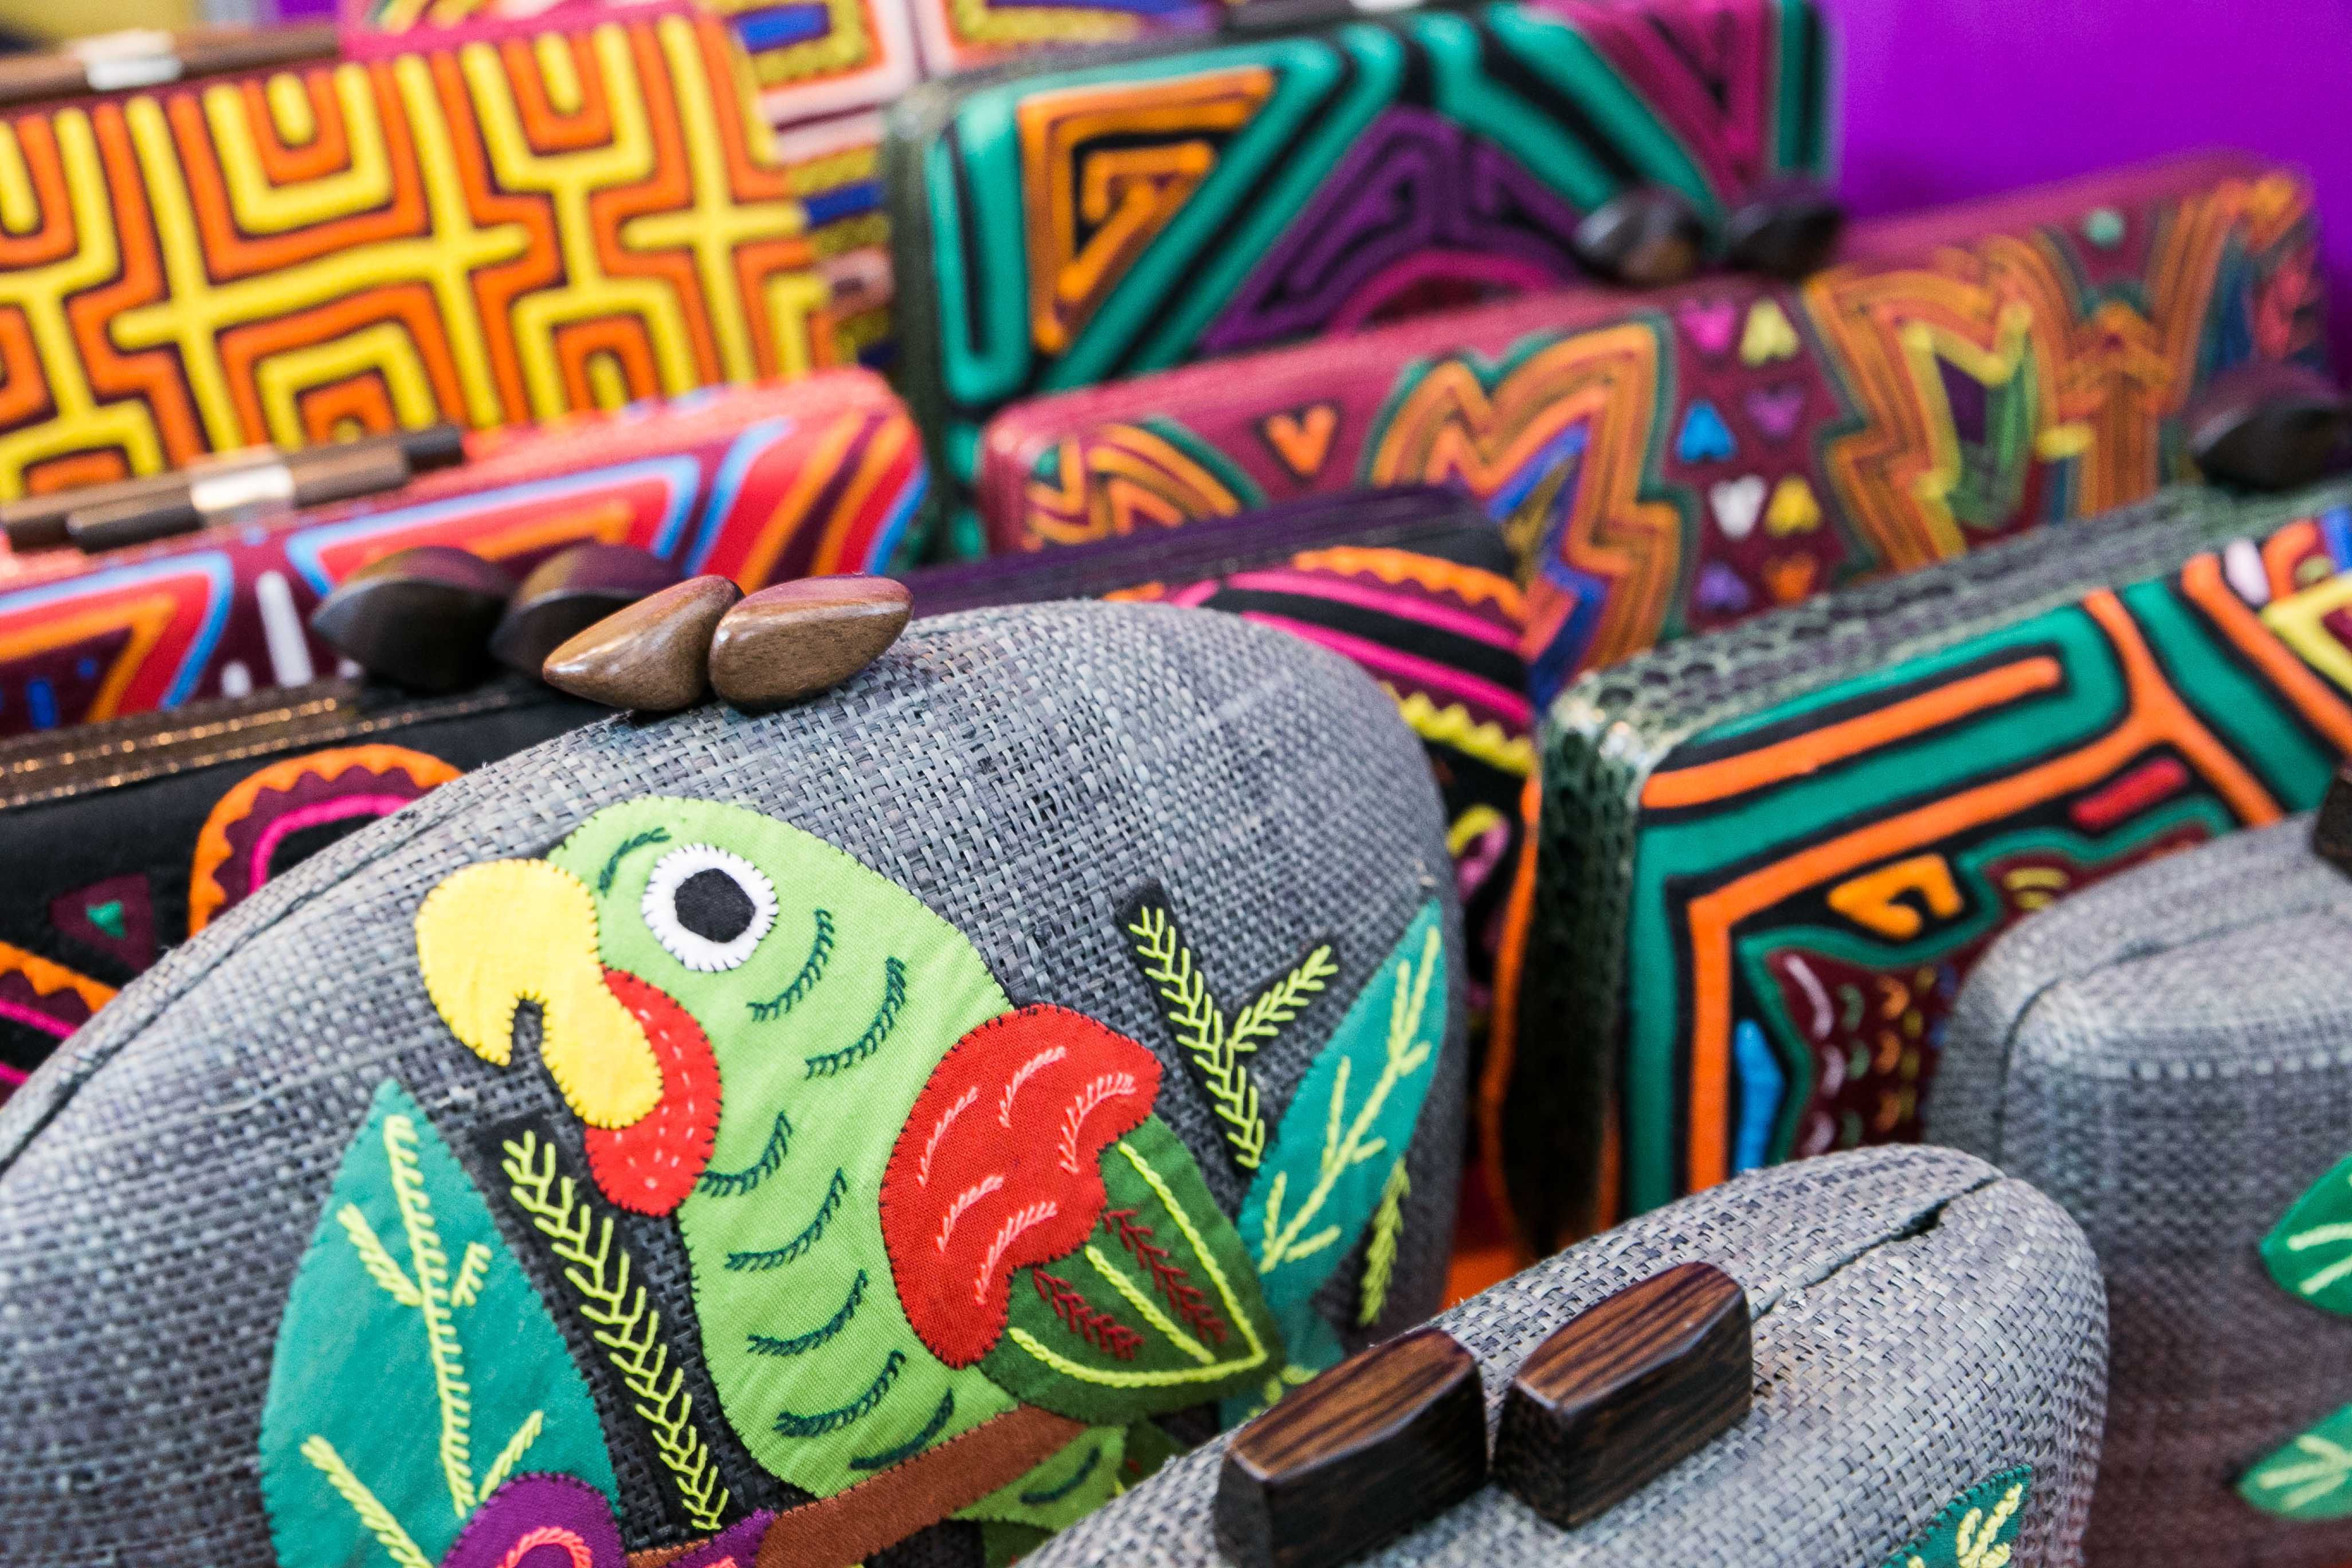 MADE IN COLOMBIA. Purses made in Colombia and based on Colombian designs are mixed with Filipino raw materials such as Kamagong wood, raffia, and mother of pearl. Photo by Pat Nabong/Rappler